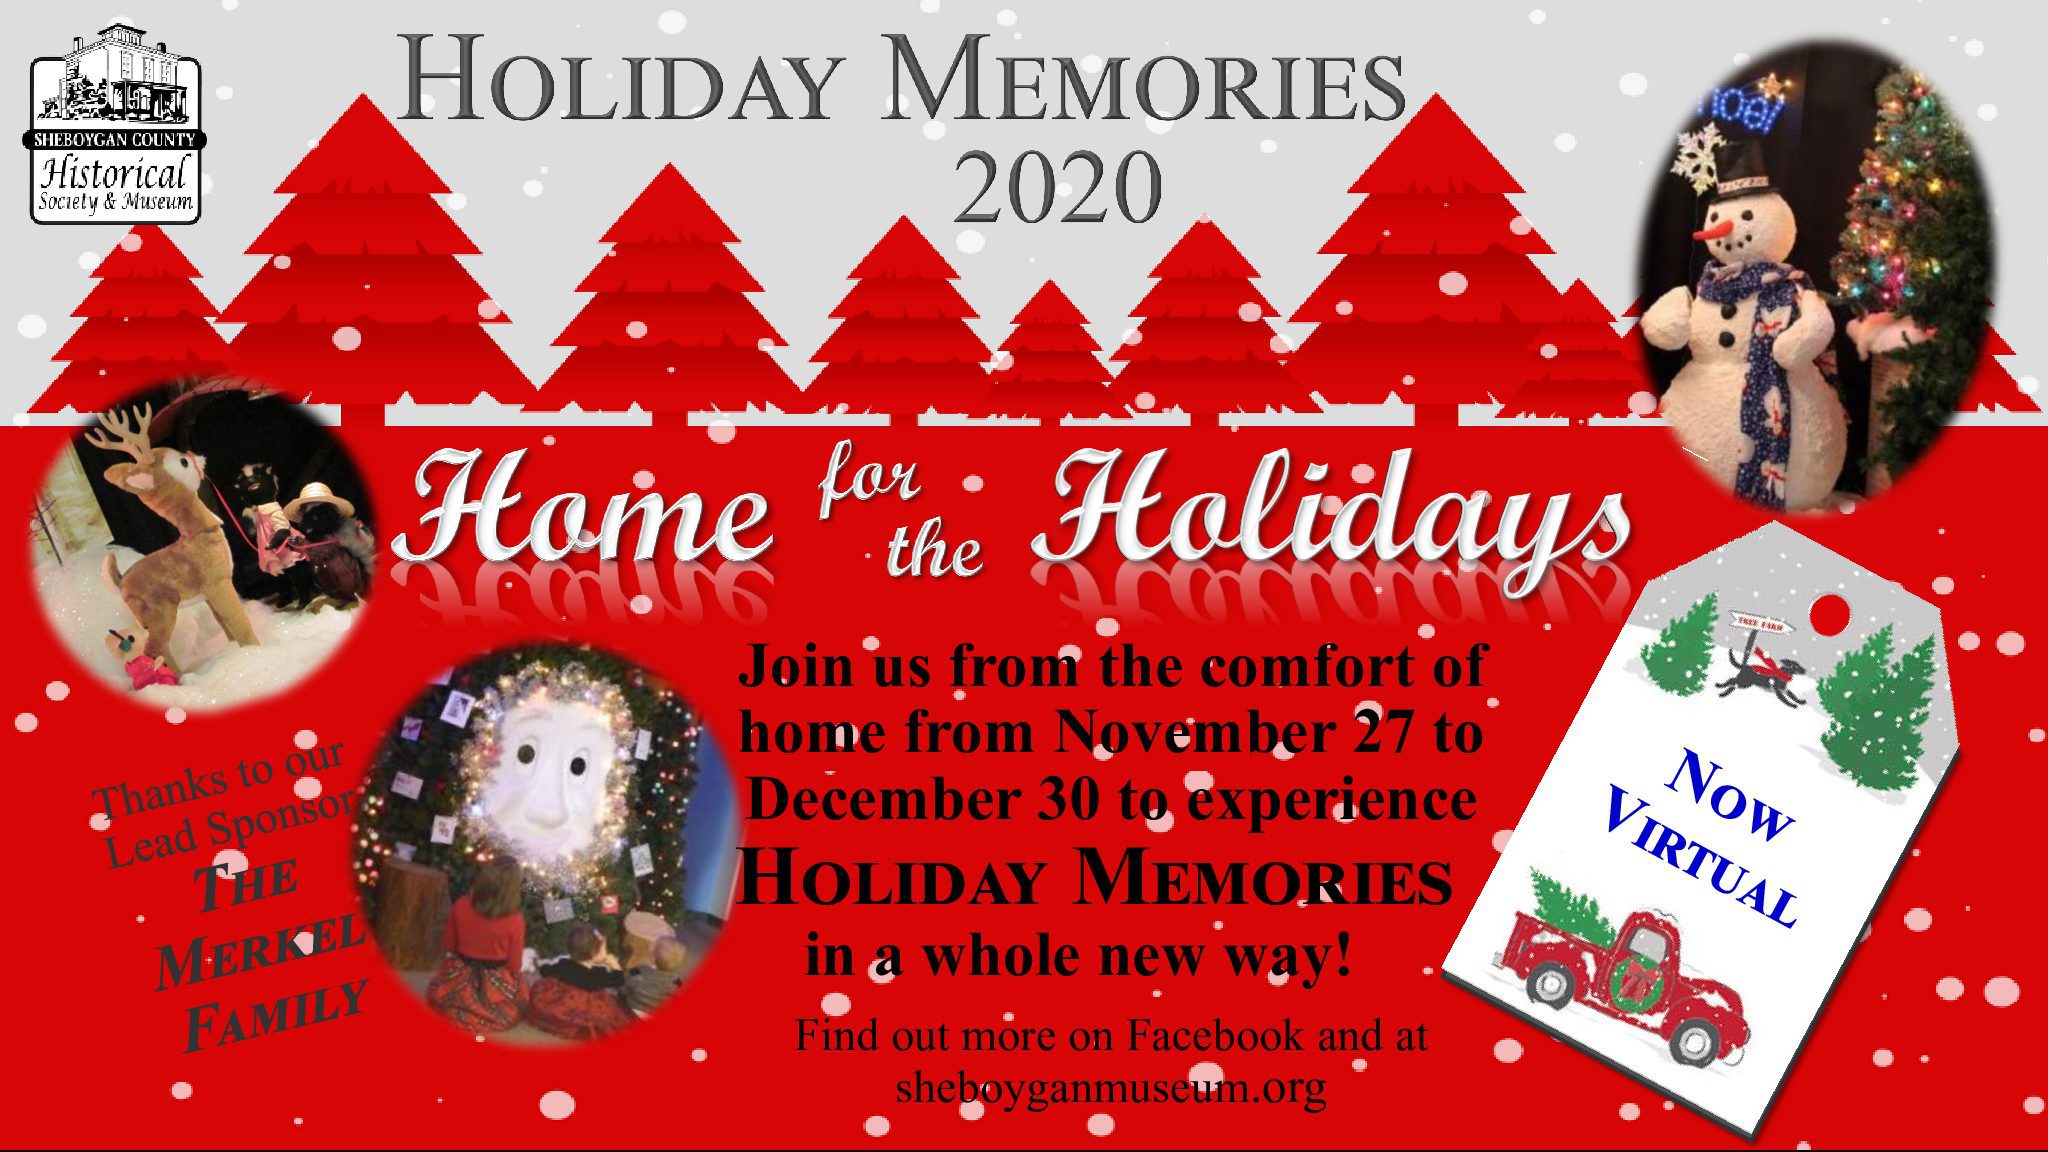 NOW VIRTUAL!! Holiday Memories 2020: Home for the Holidays